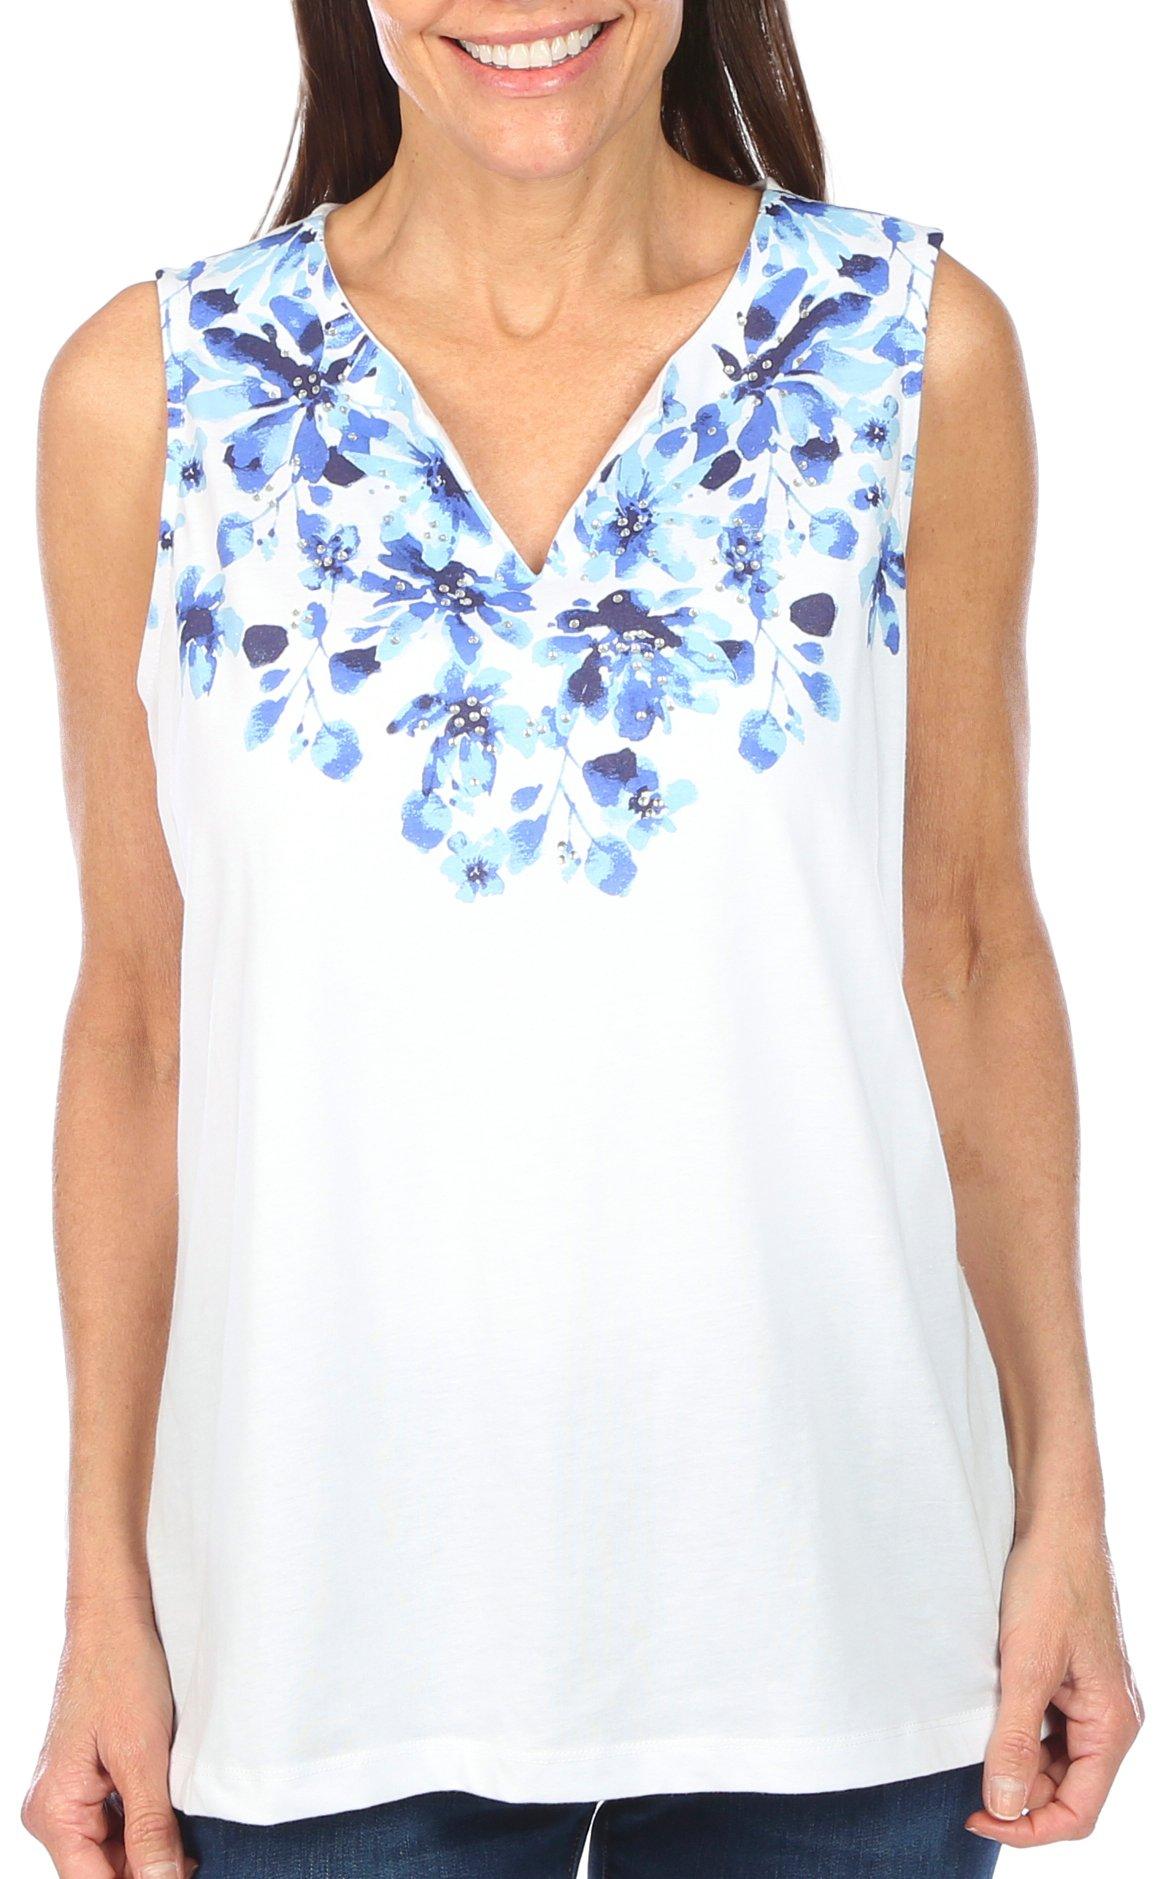 Coral Bay Womens Sleeveless Embellished Notch Neckline Top